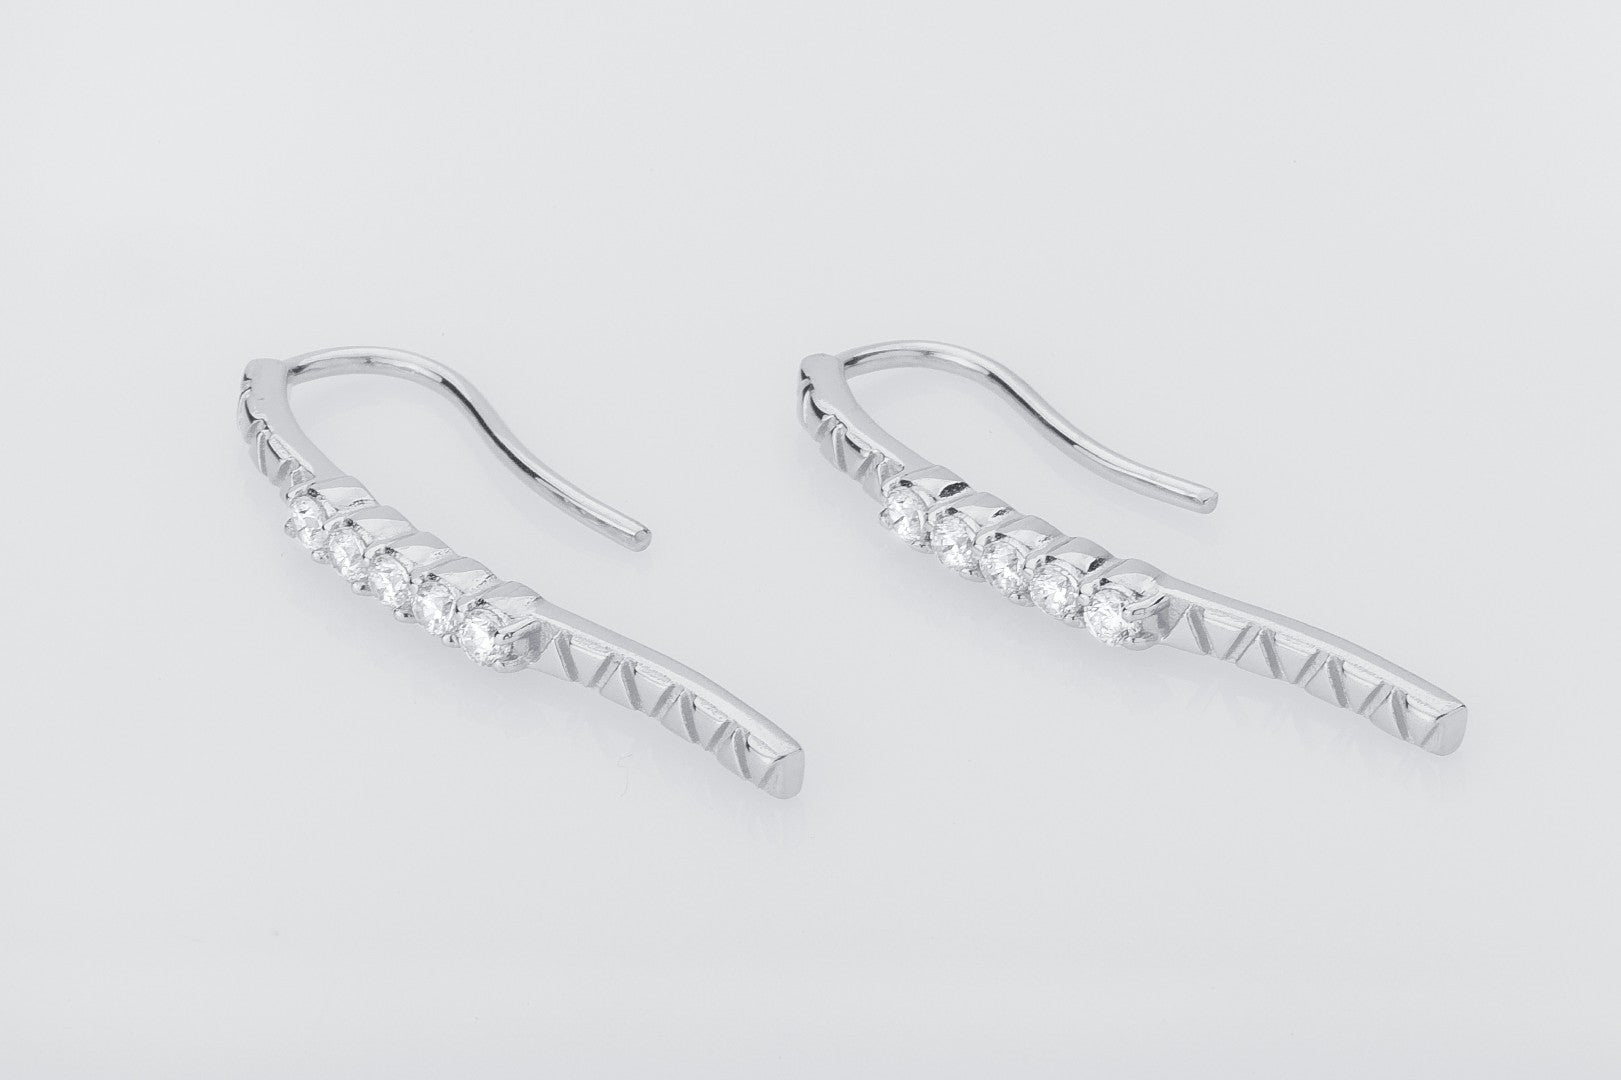 Simple Earrings with Clear Gems, 925 silver